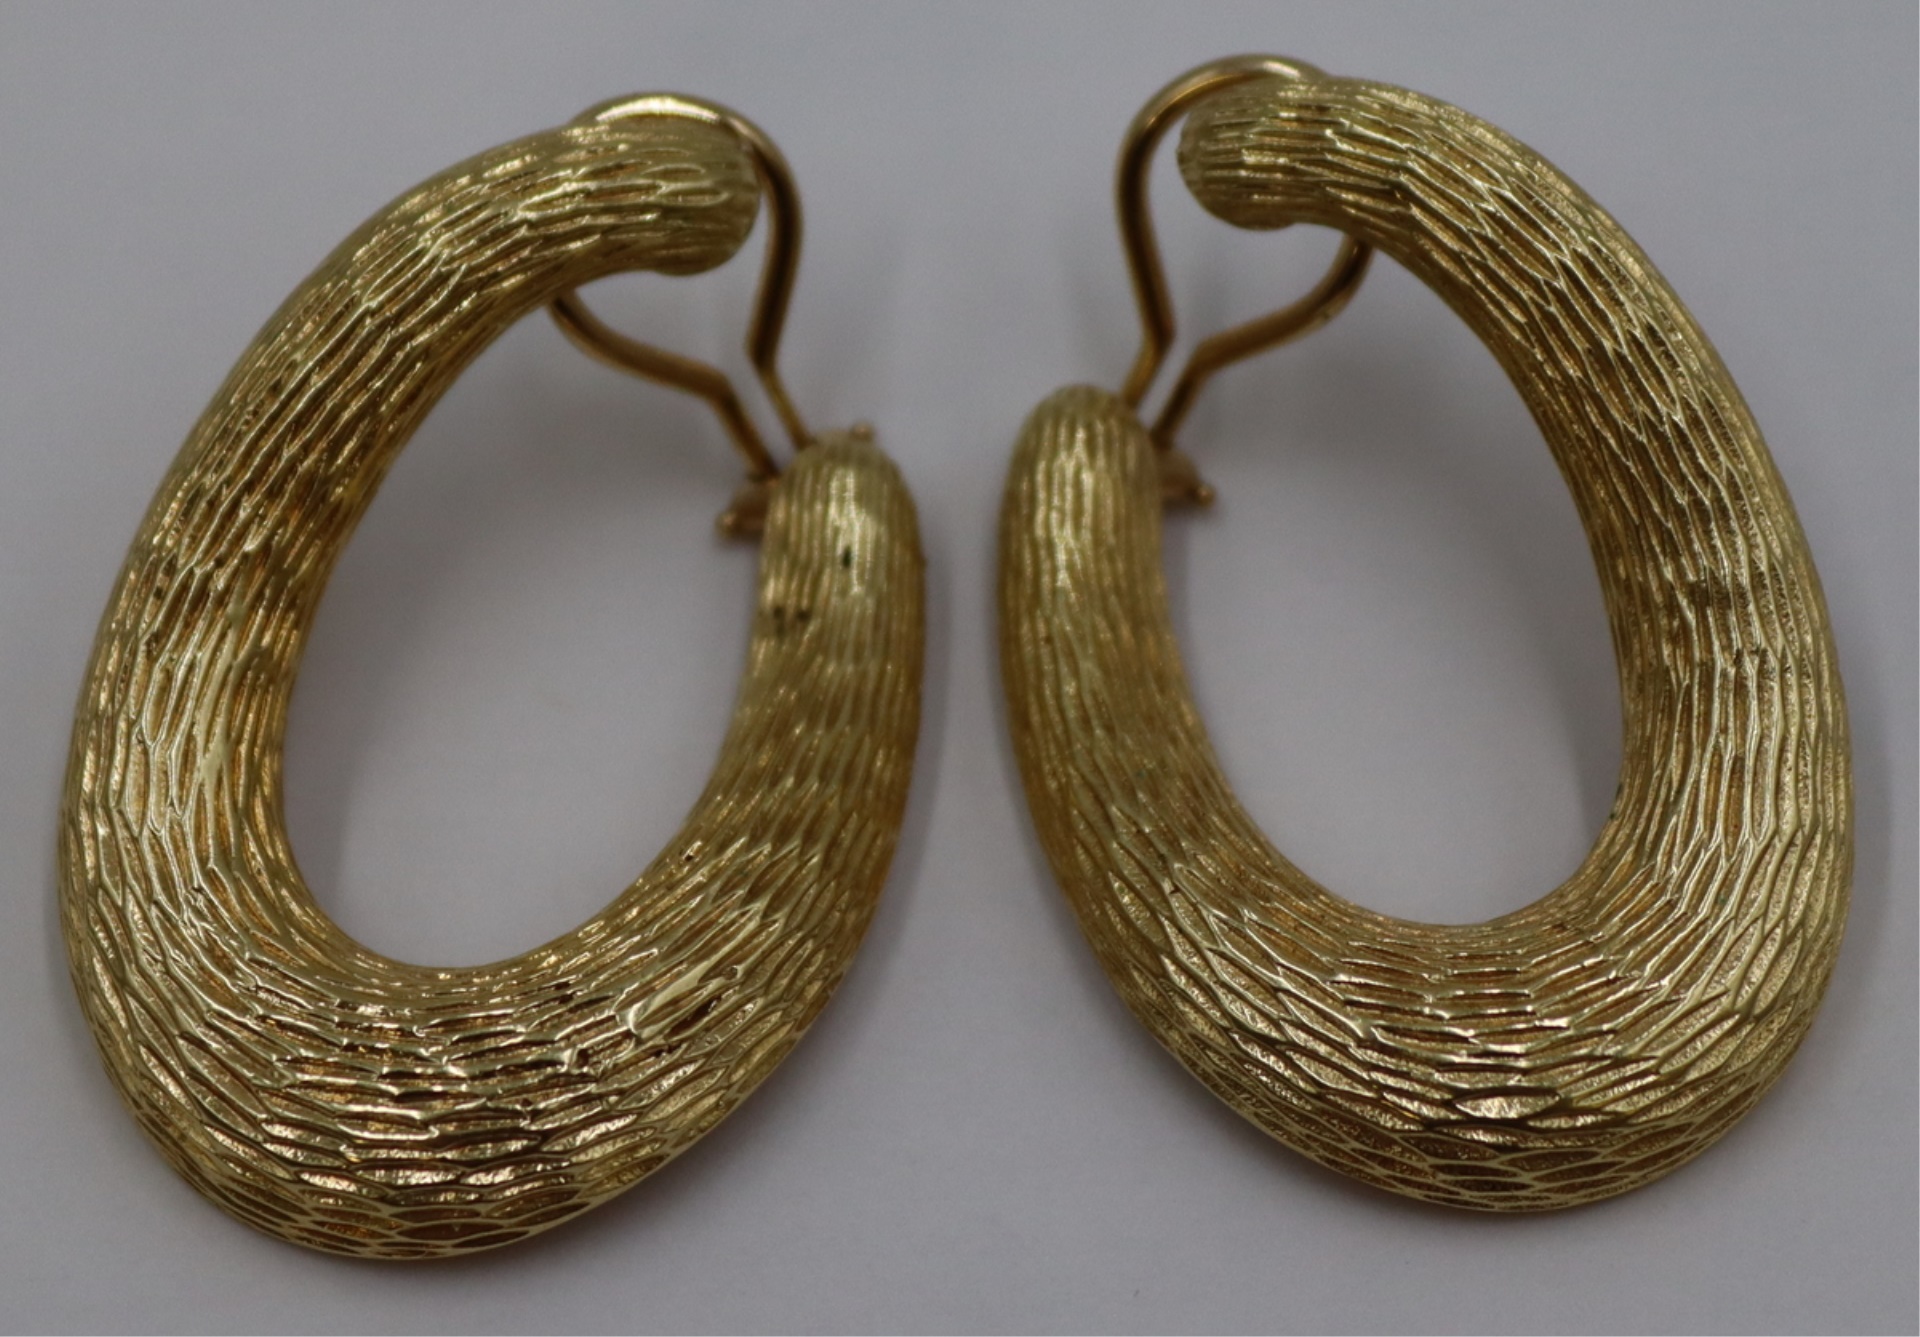 JEWELRY. PAIR OF SIGNED 14KT GOLD